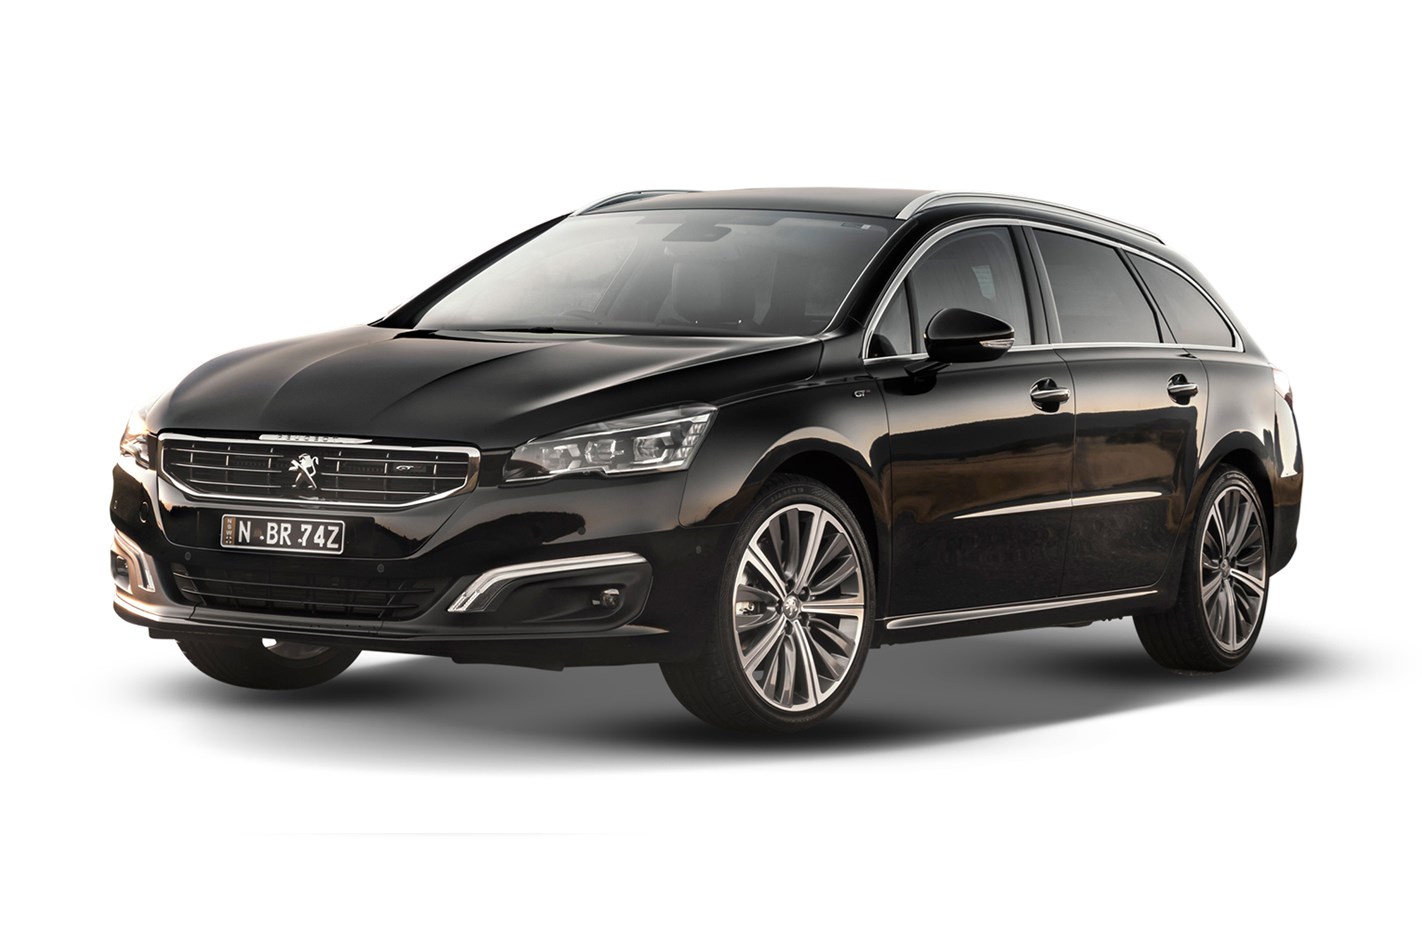 2017 Peugeot 508 GT Touring HDi, 2.0L 4cyl Diesel